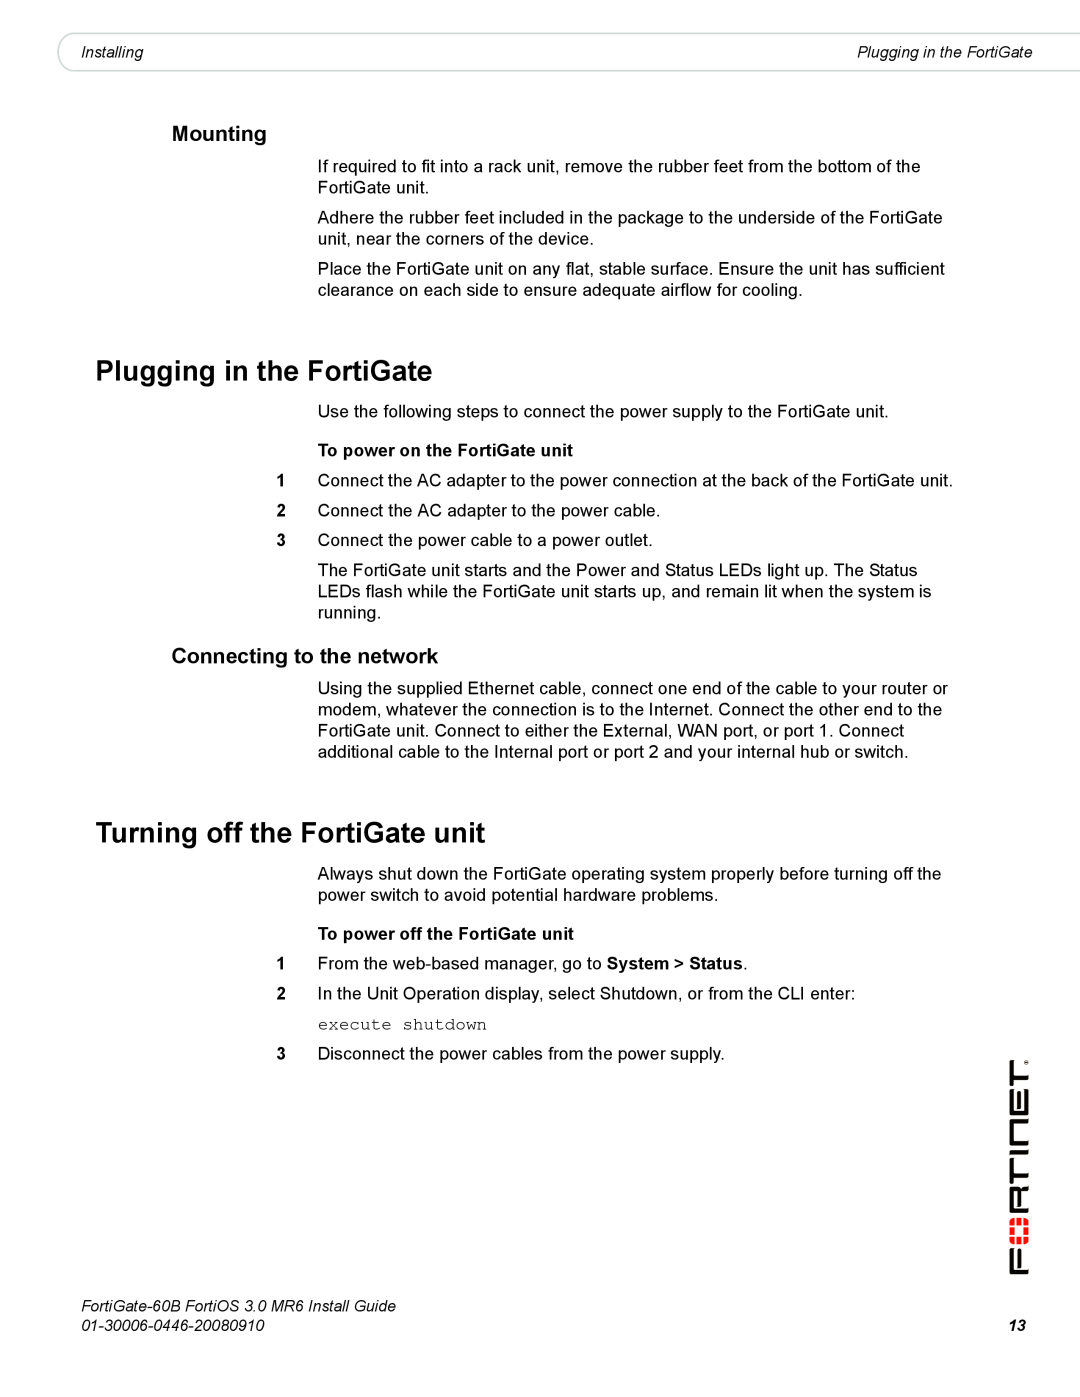 Fortinet 60B manual Plugging in the FortiGate, Turning off the FortiGate unit, Mounting, Connecting to the network 